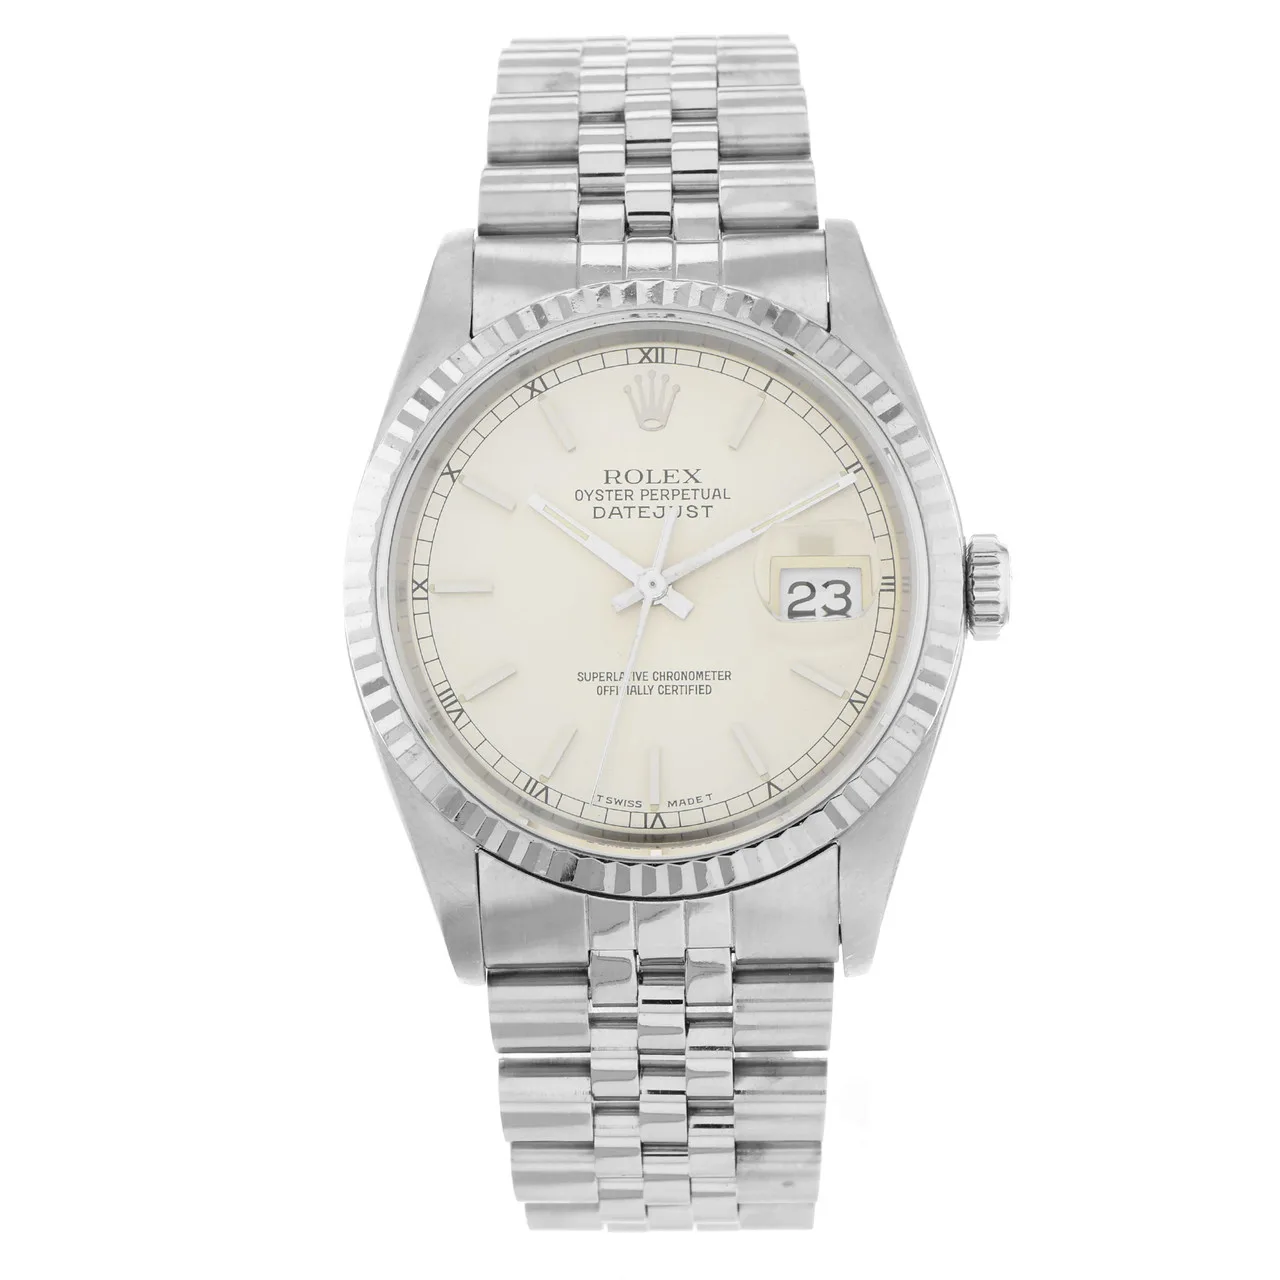 1989 Rolex Datejust 36 Fluted / Silver / Jubilee 16234 Listing Image 1